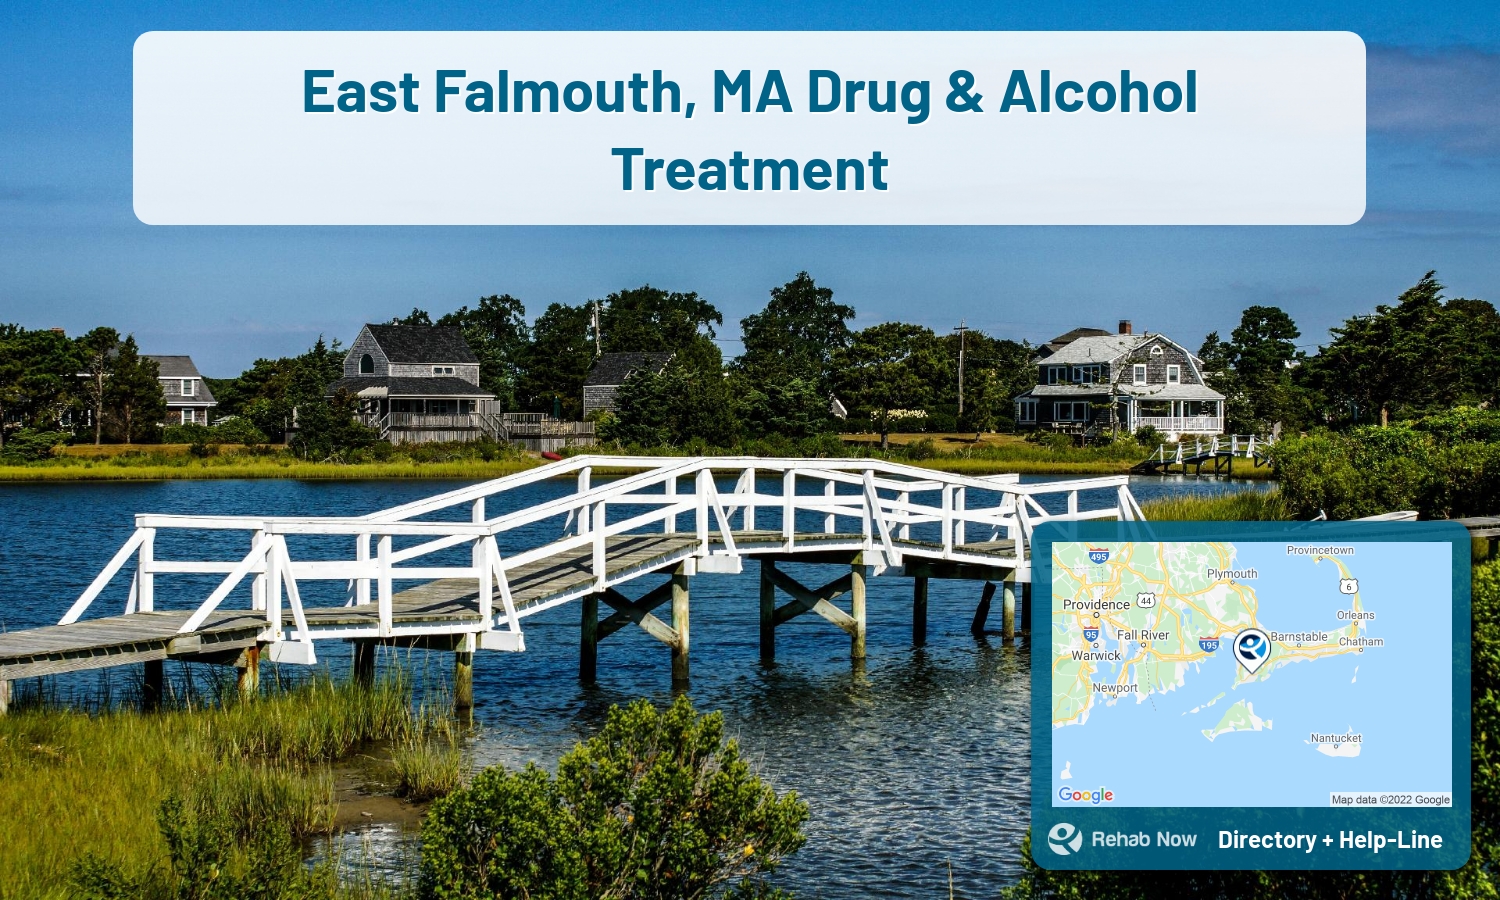 View options, availability, treatment methods, and more, for drug rehab and alcohol treatment in East Falmouth, Massachusetts